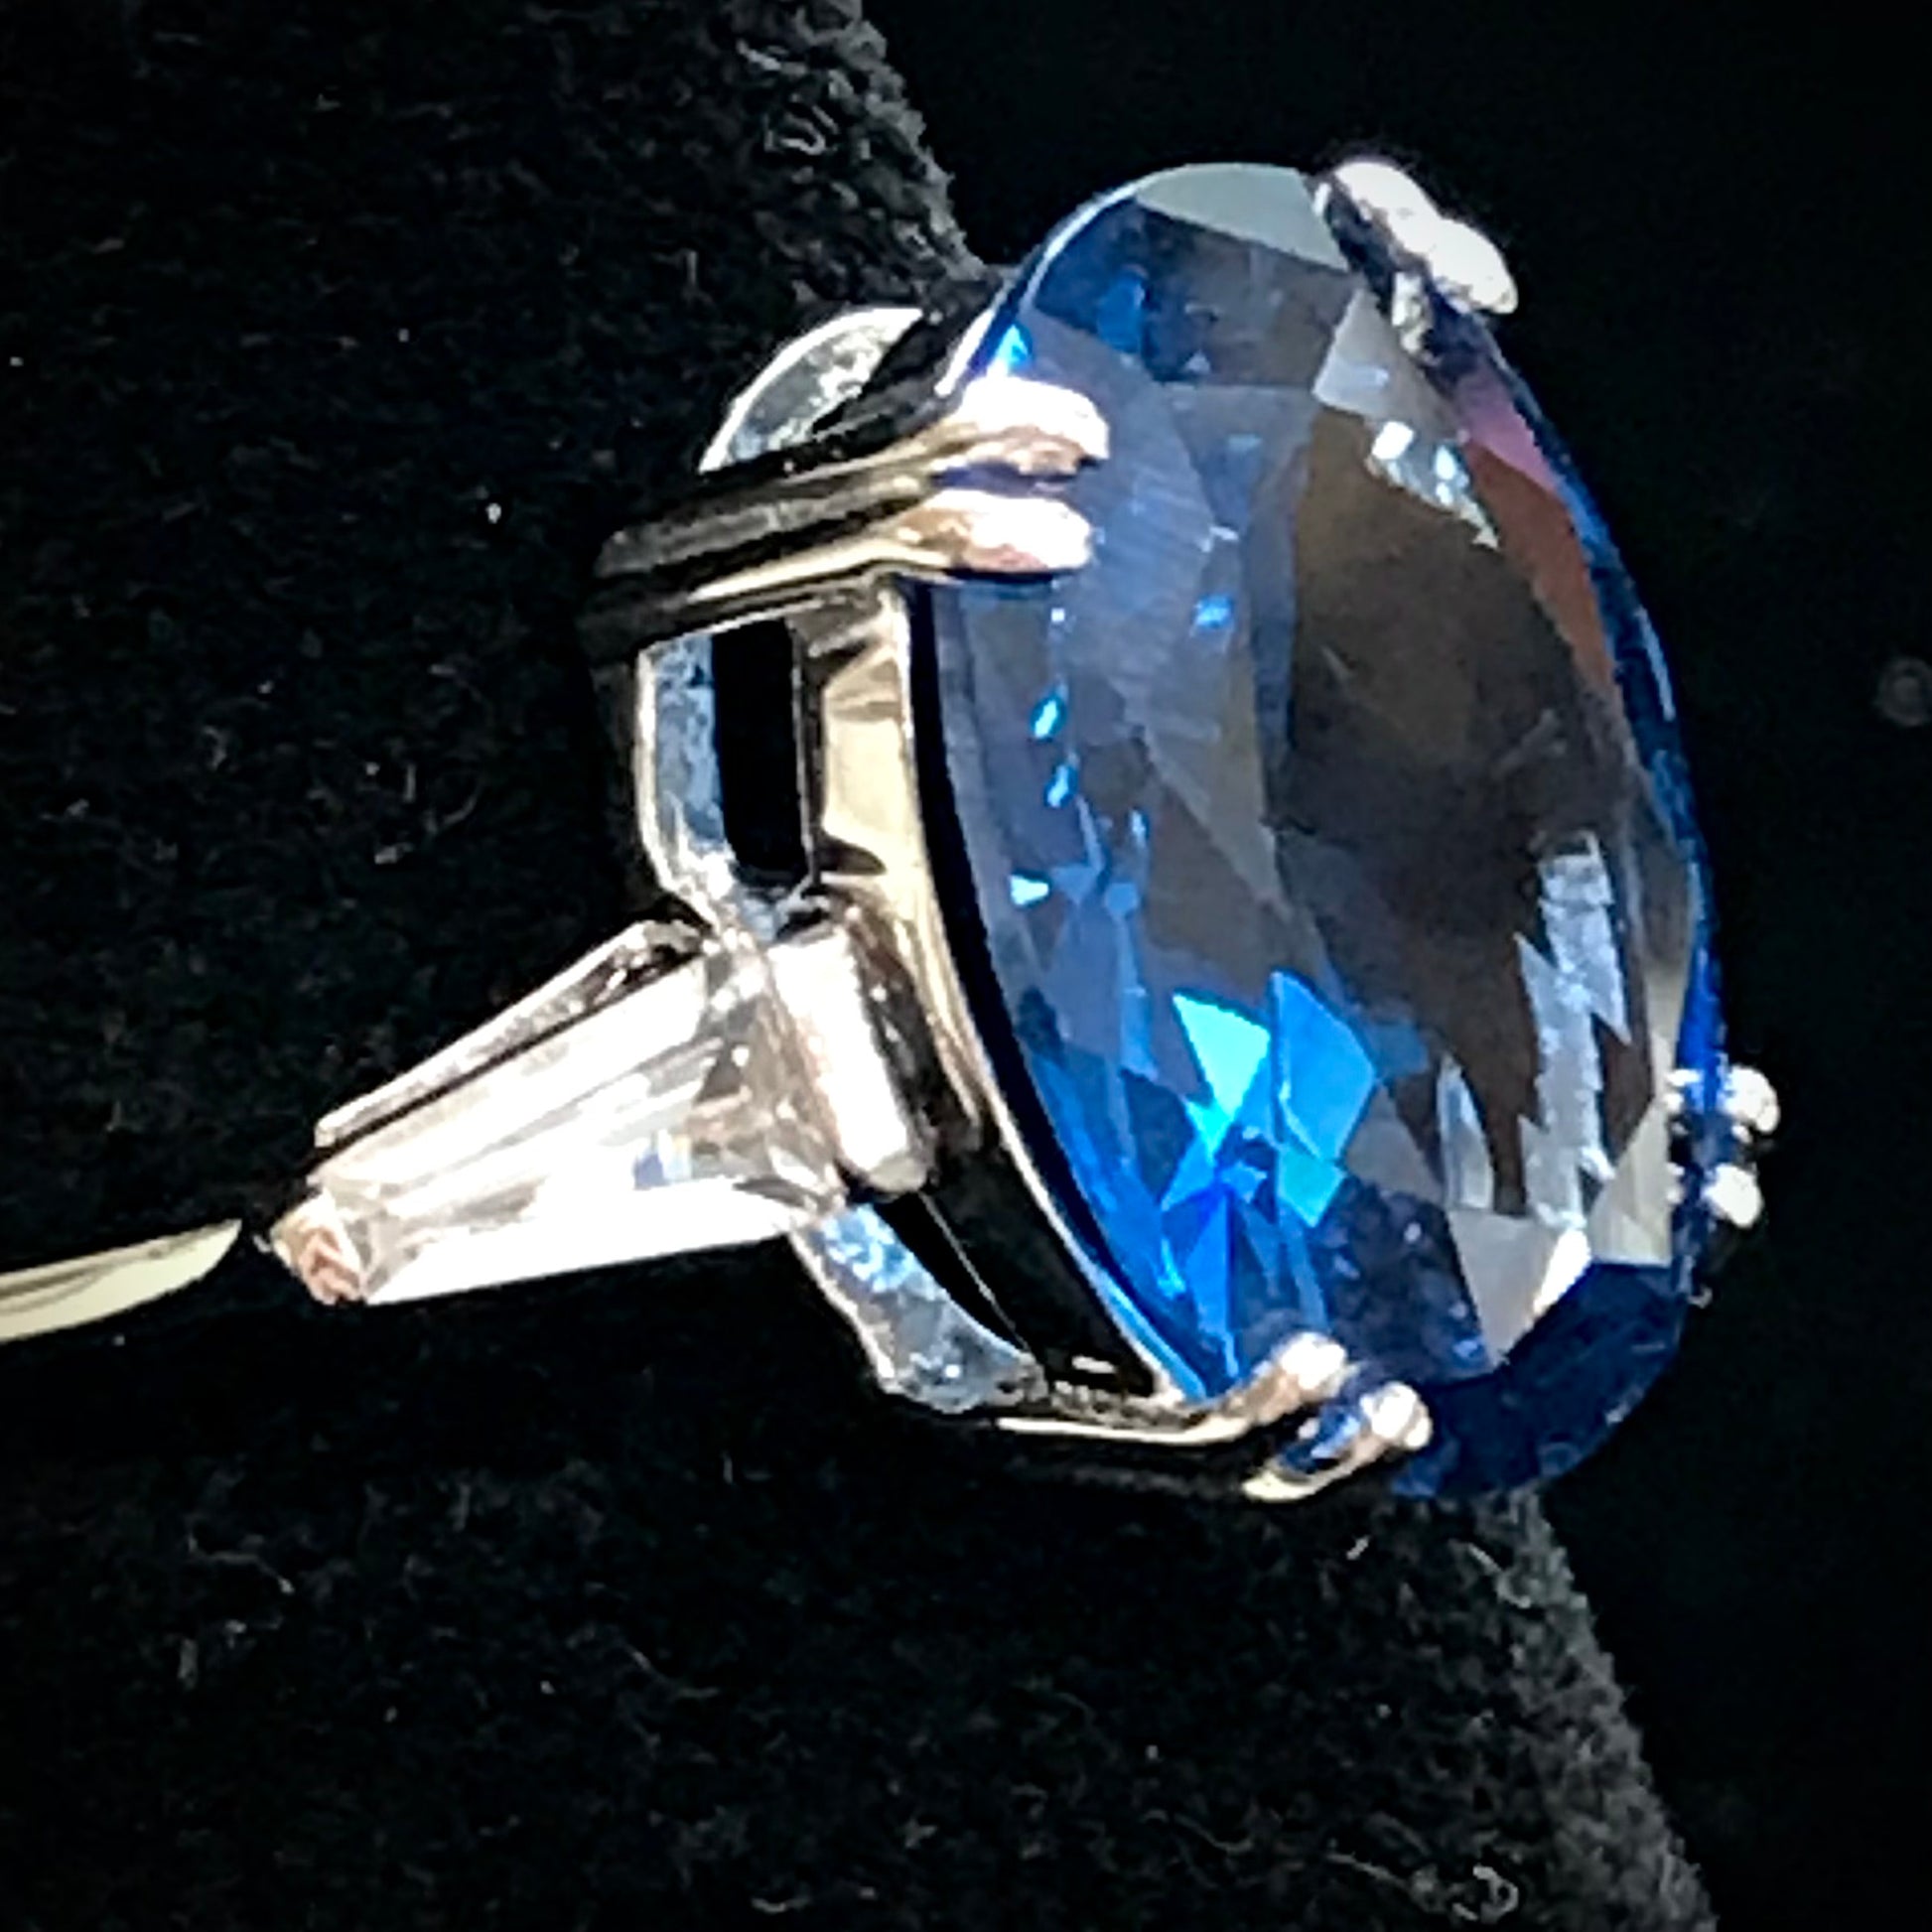 A sterling silver ring set with a faceted oval cut blue spinel and cubic zirconia baguettes.